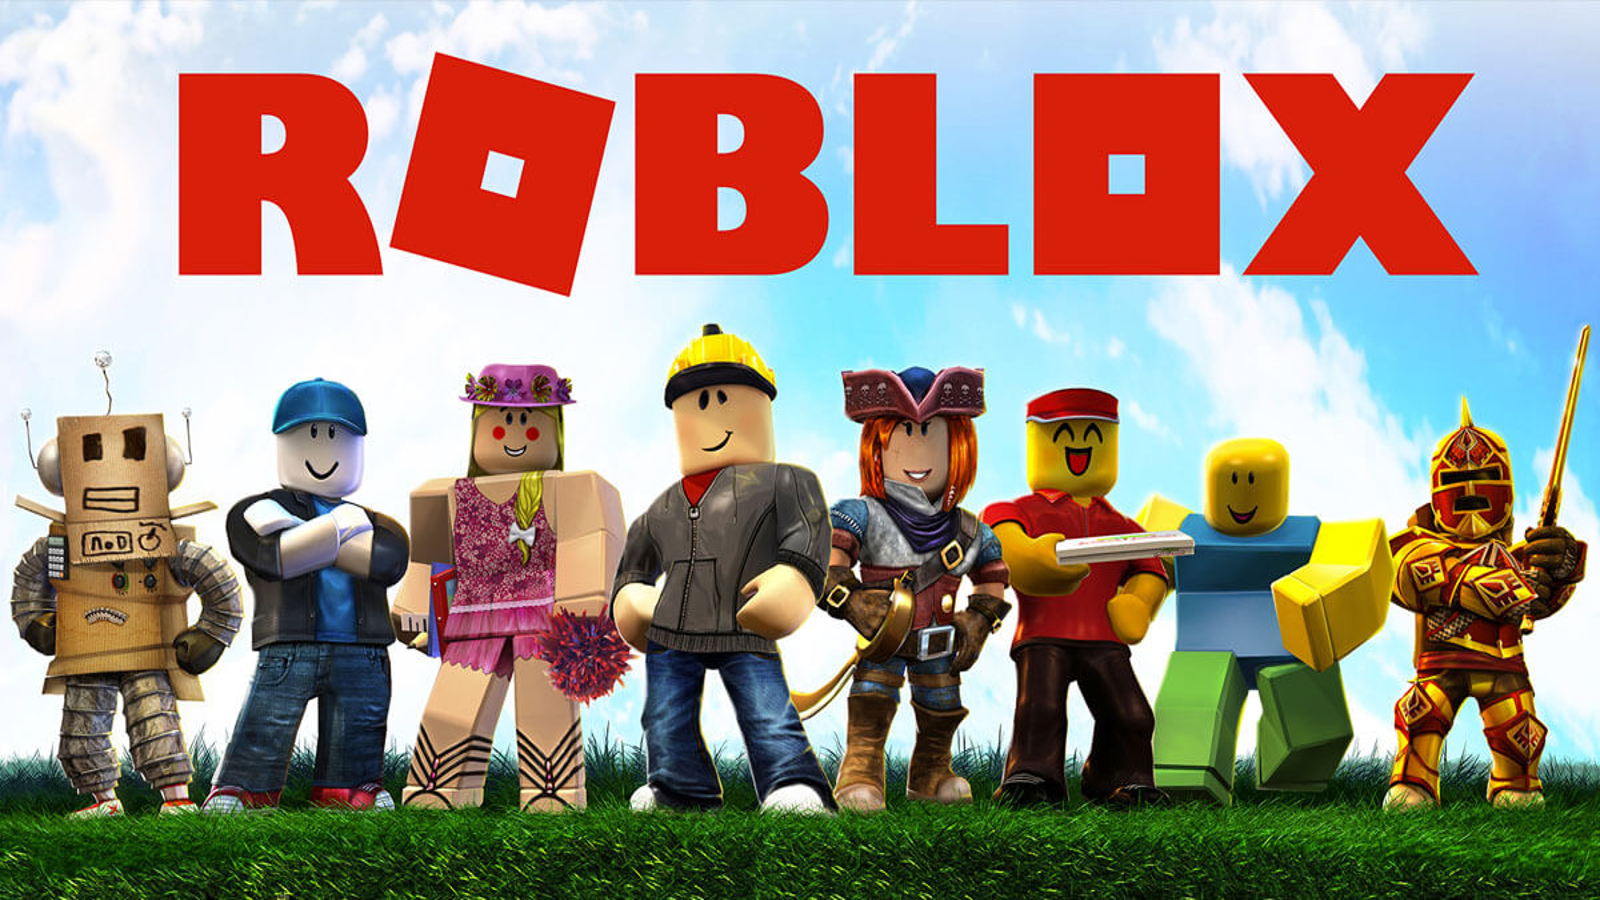 Roblox says 70 user-created games have crossed a billion plays